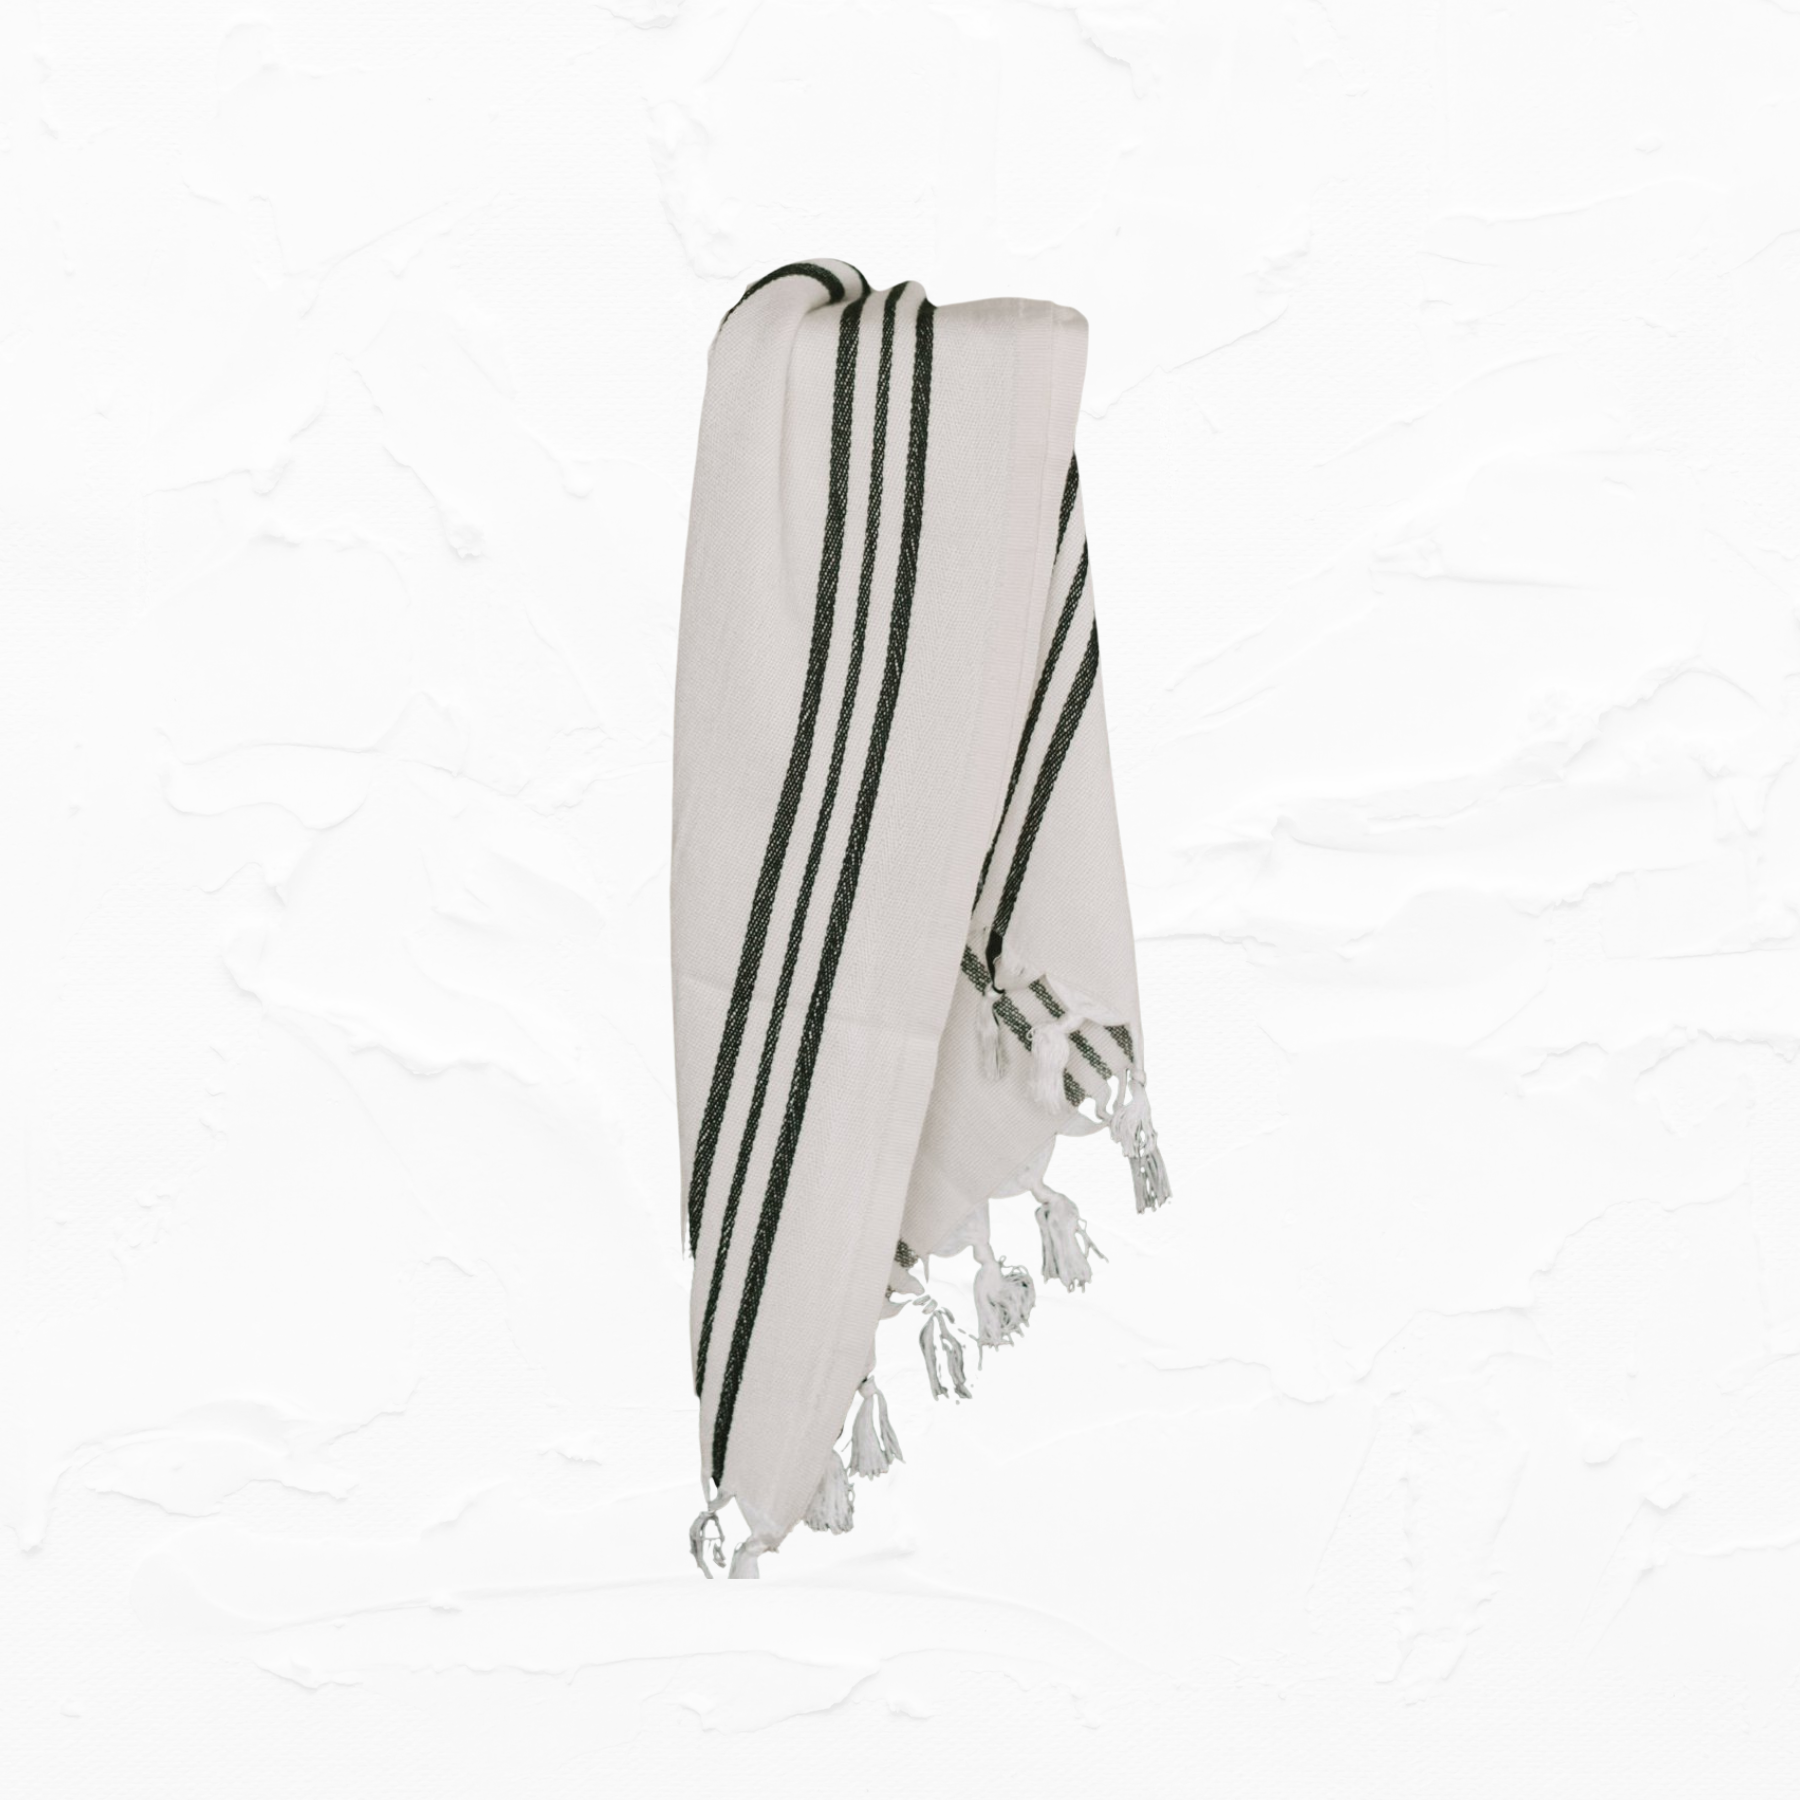 https://cdn.shopify.com/s/files/1/0532/3672/8004/products/turkish-cotton-bamboo-hand-towel-three-stripe_2000x.png?v=1680732353